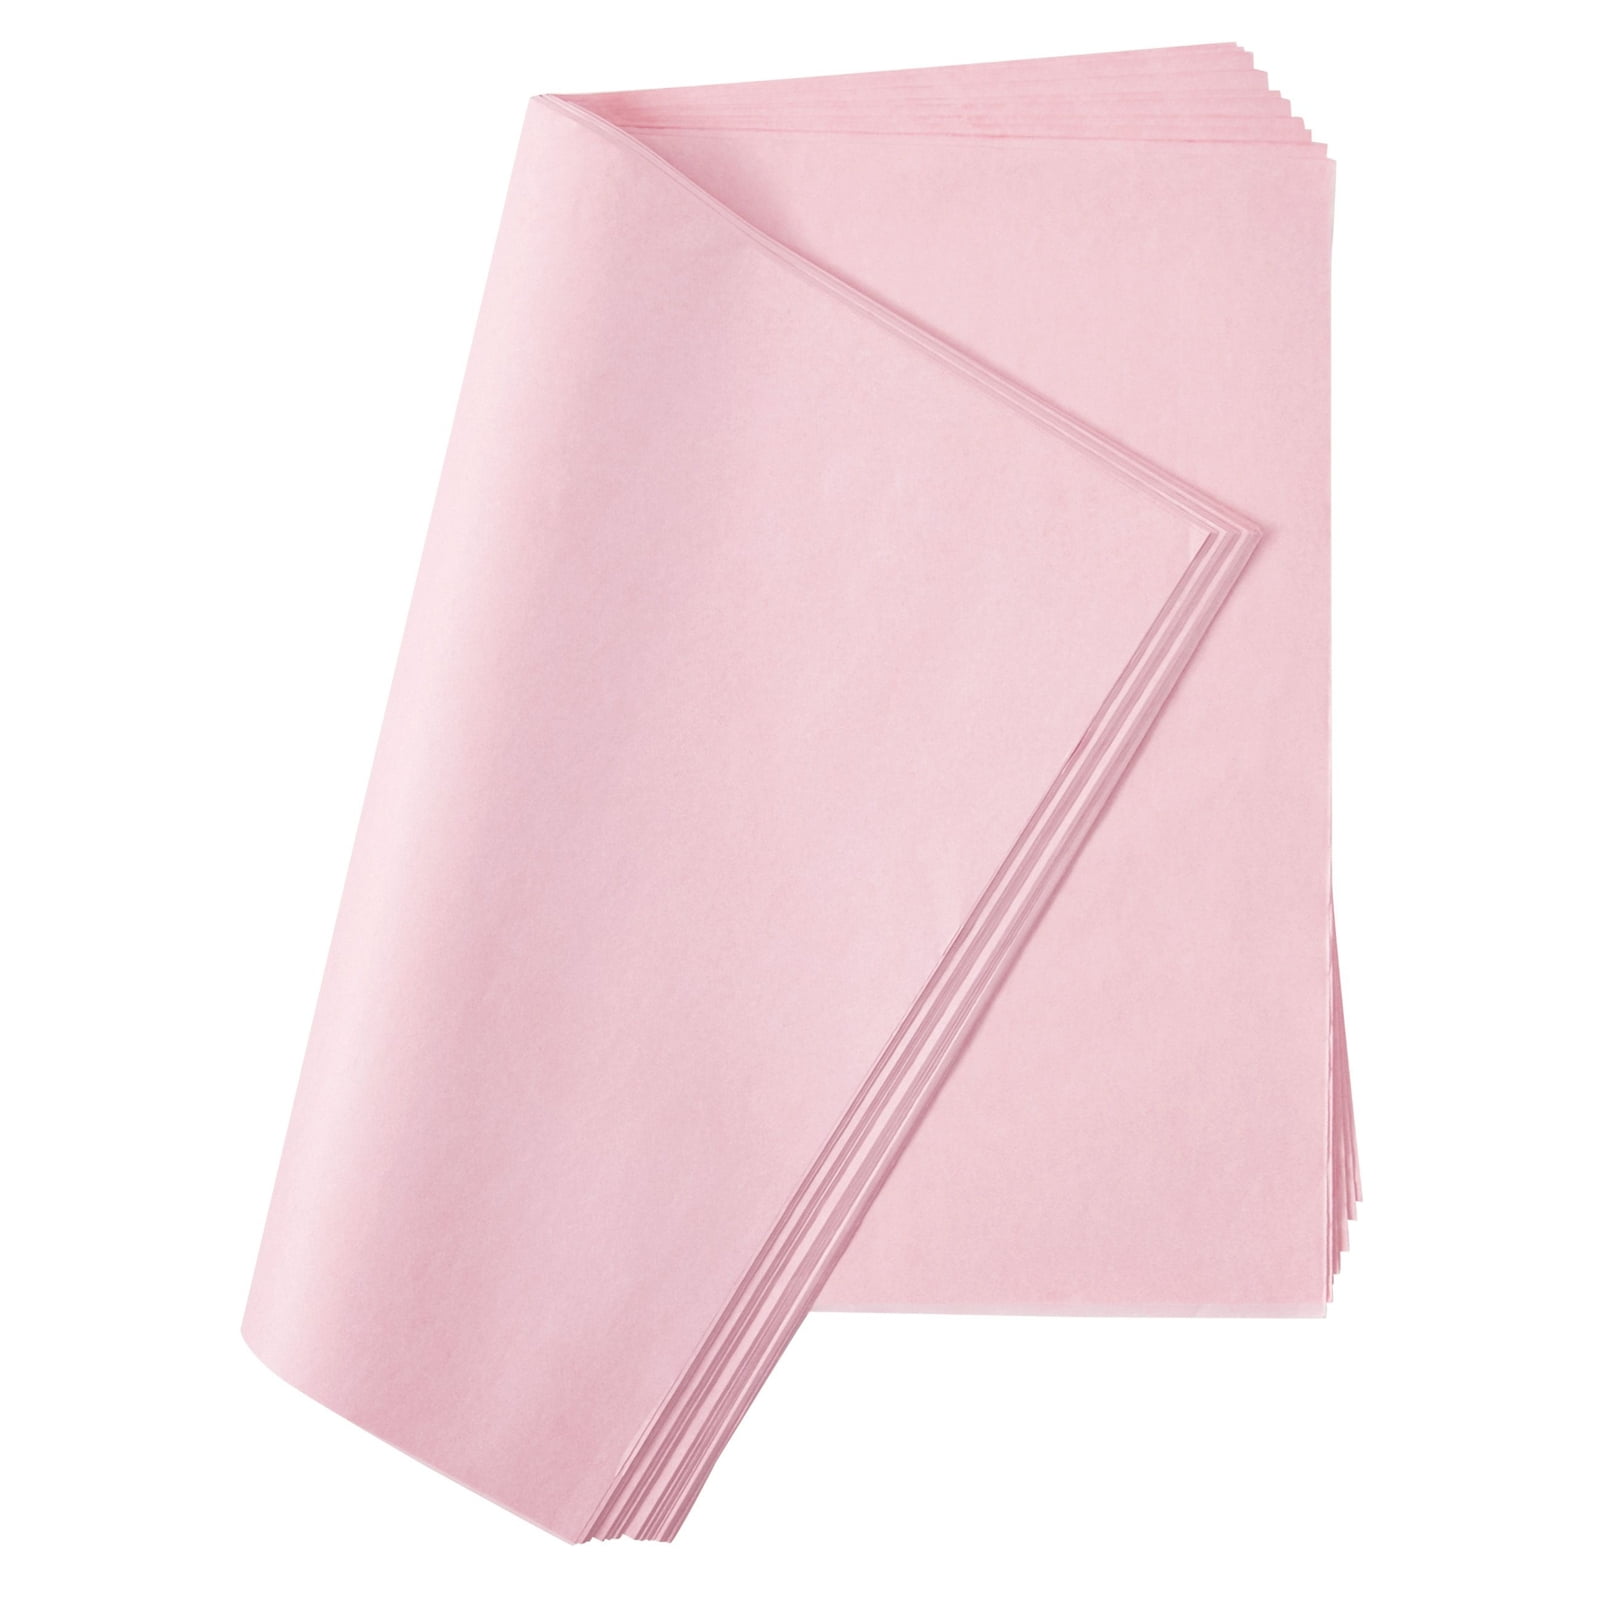 Light Hot Pink Solid Color Wrapping Paper Sheets | Zazzle